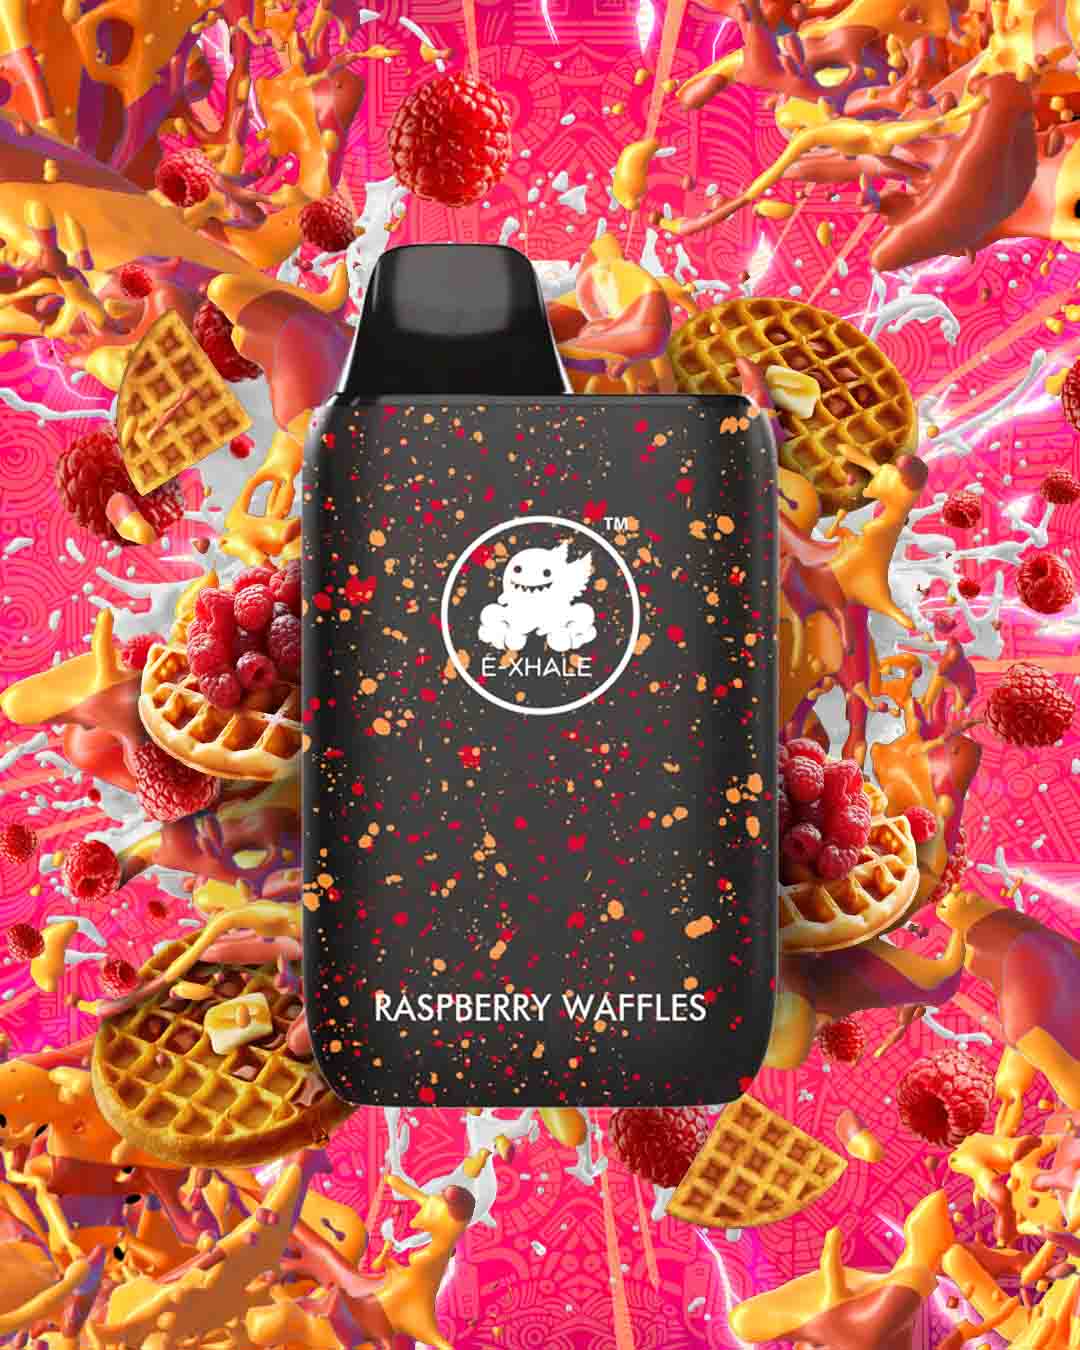 High-Puff Rechargeable Vape South Africa. Raspberry Waffles. Cheapest and Highest Quality Vape South Africa. E-XHALE Disposable Vapes South Africa